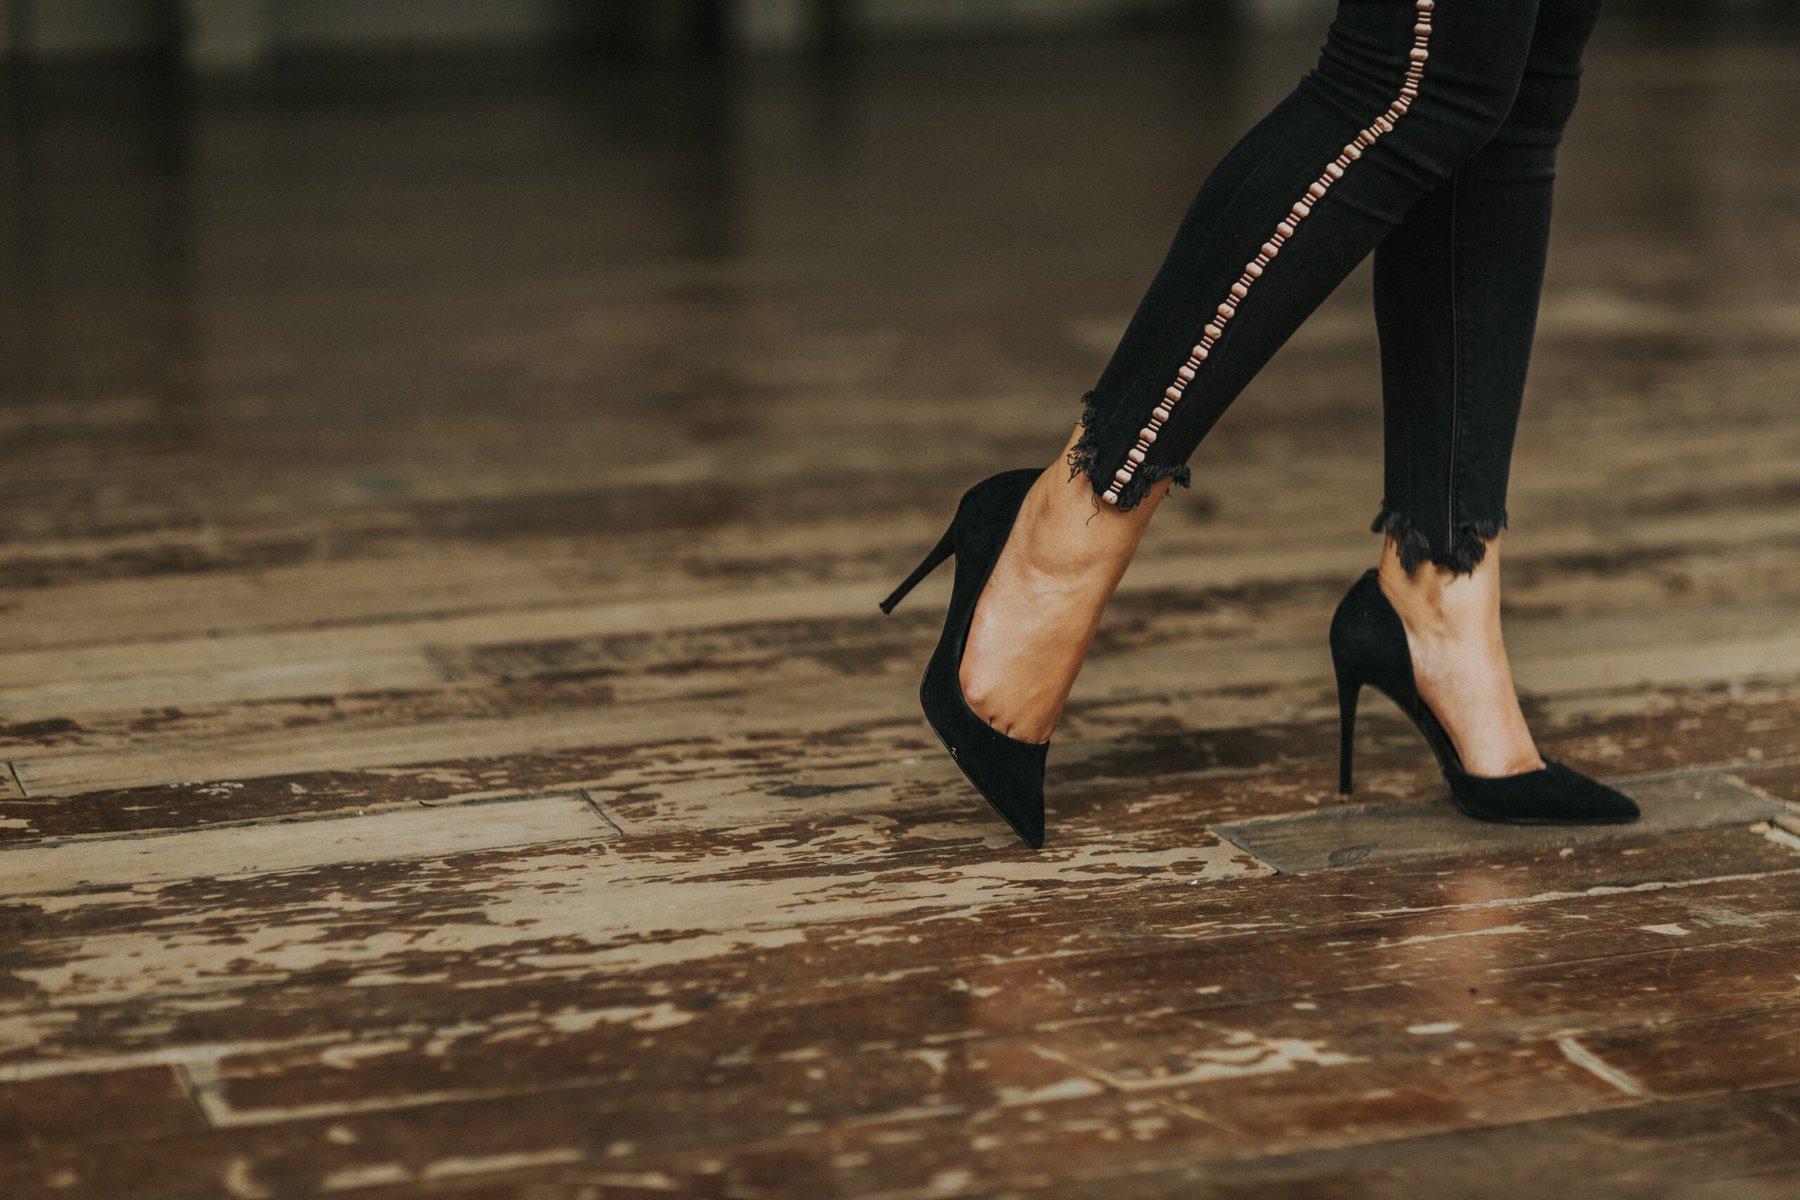 What are the benefits of wearing high-heeled shoes for women? Why are they  so popular now? - Quora